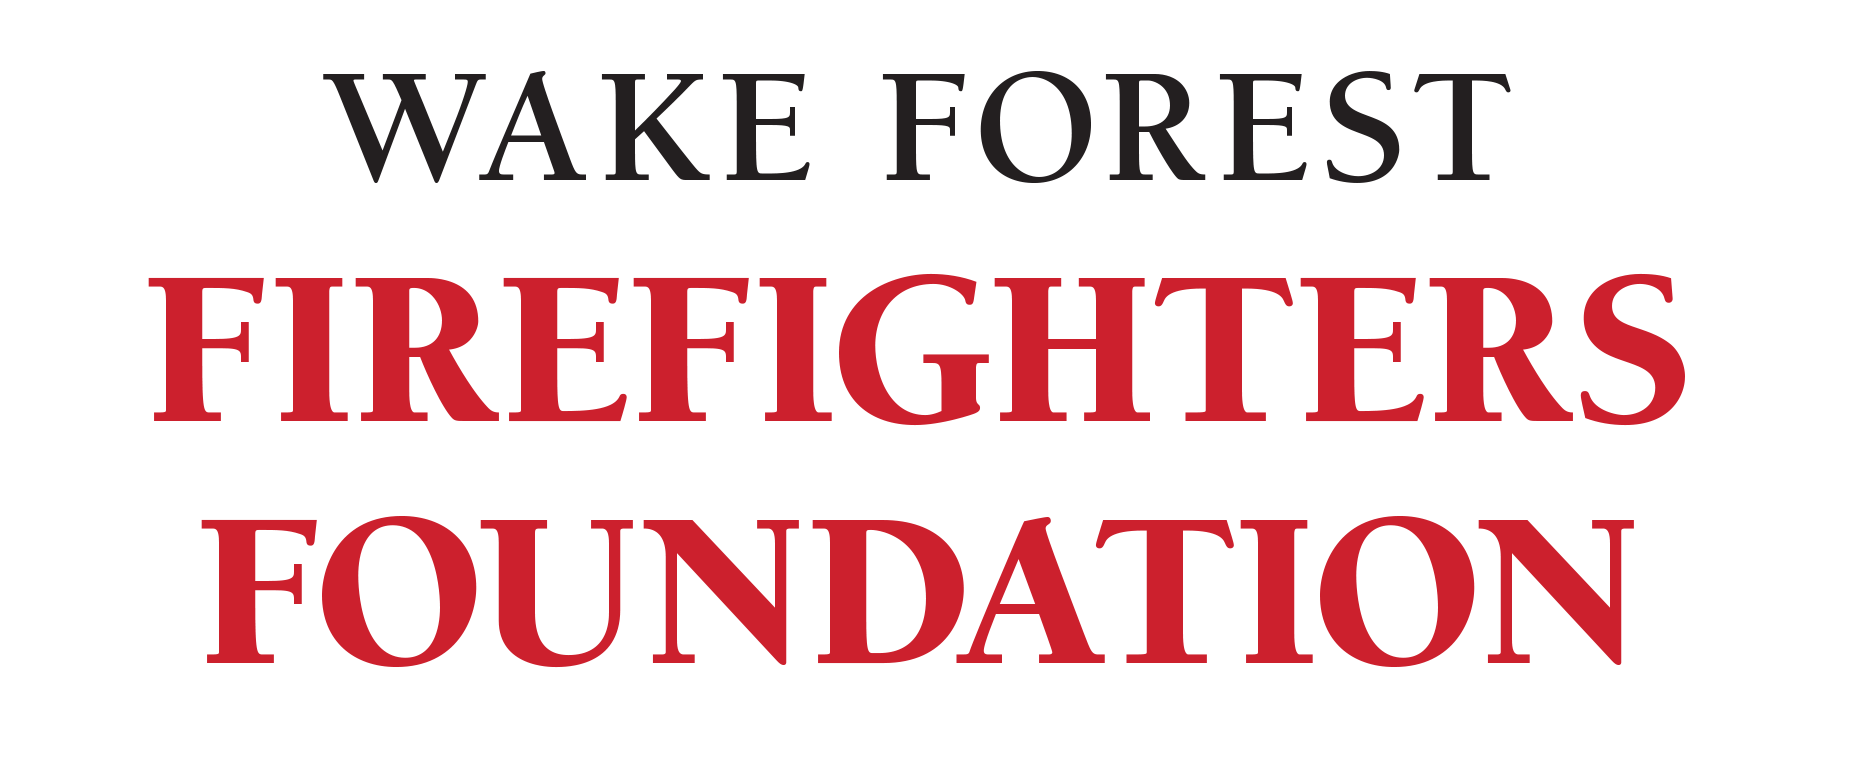 Firefighters Foundation